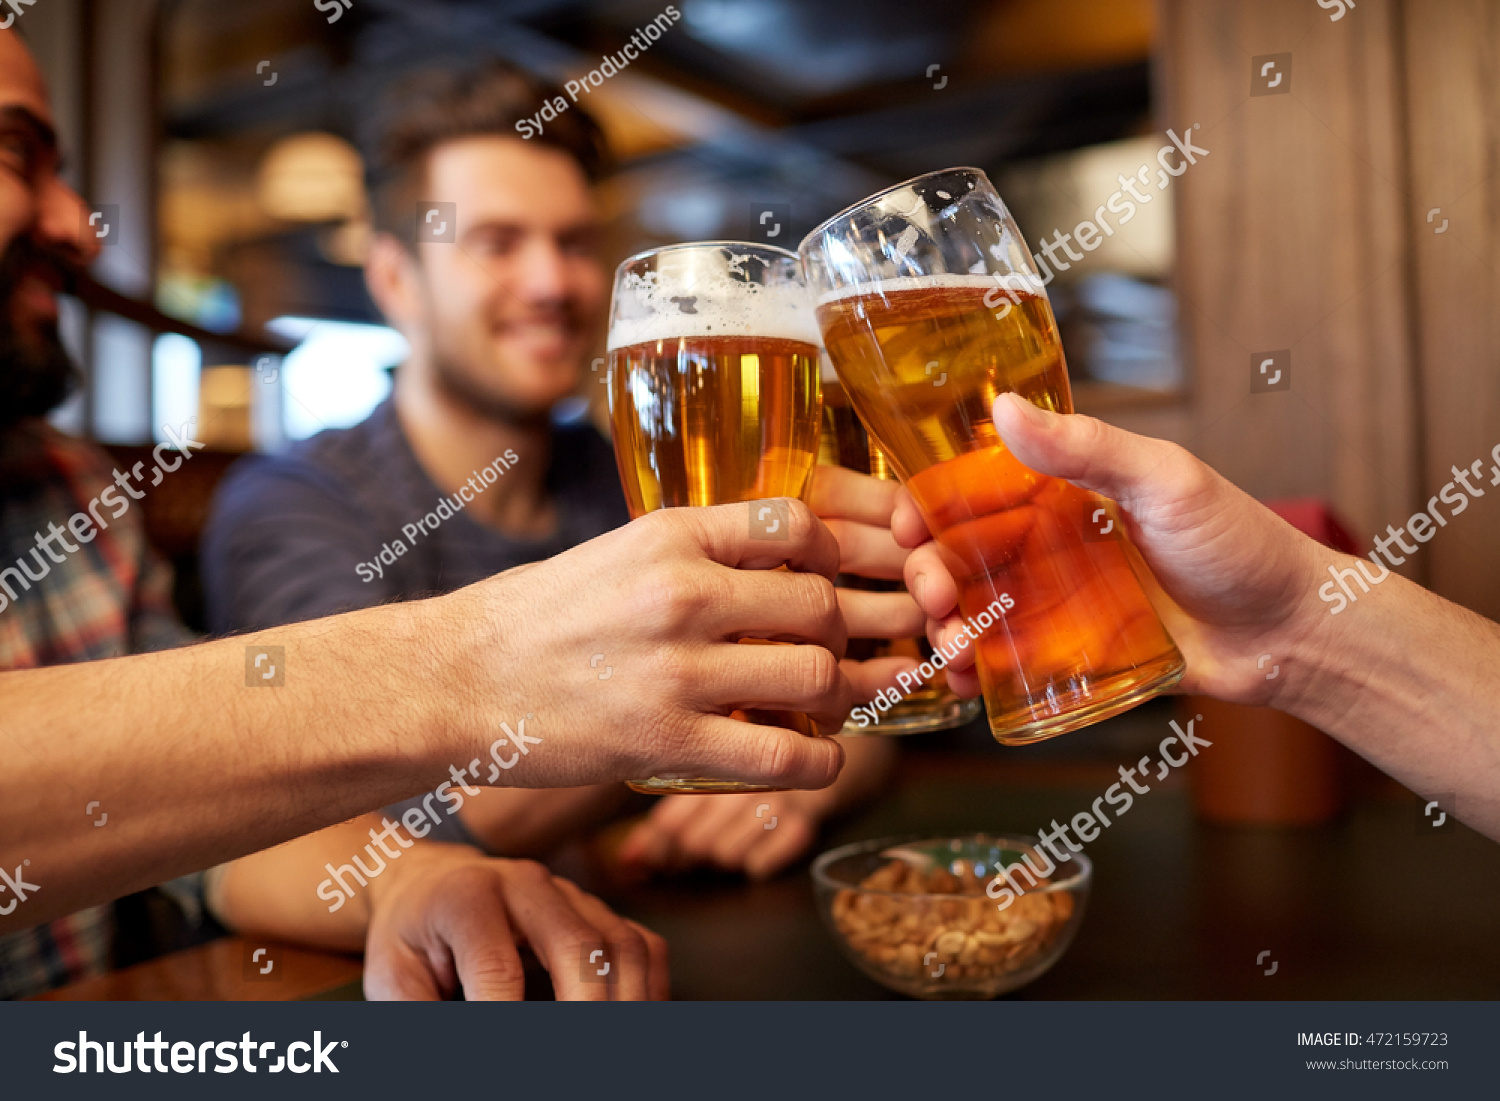 people, men, leisure, friendship and celebration concept - happy male friends drinking beer and clinking glasses at bar or pub #472159723